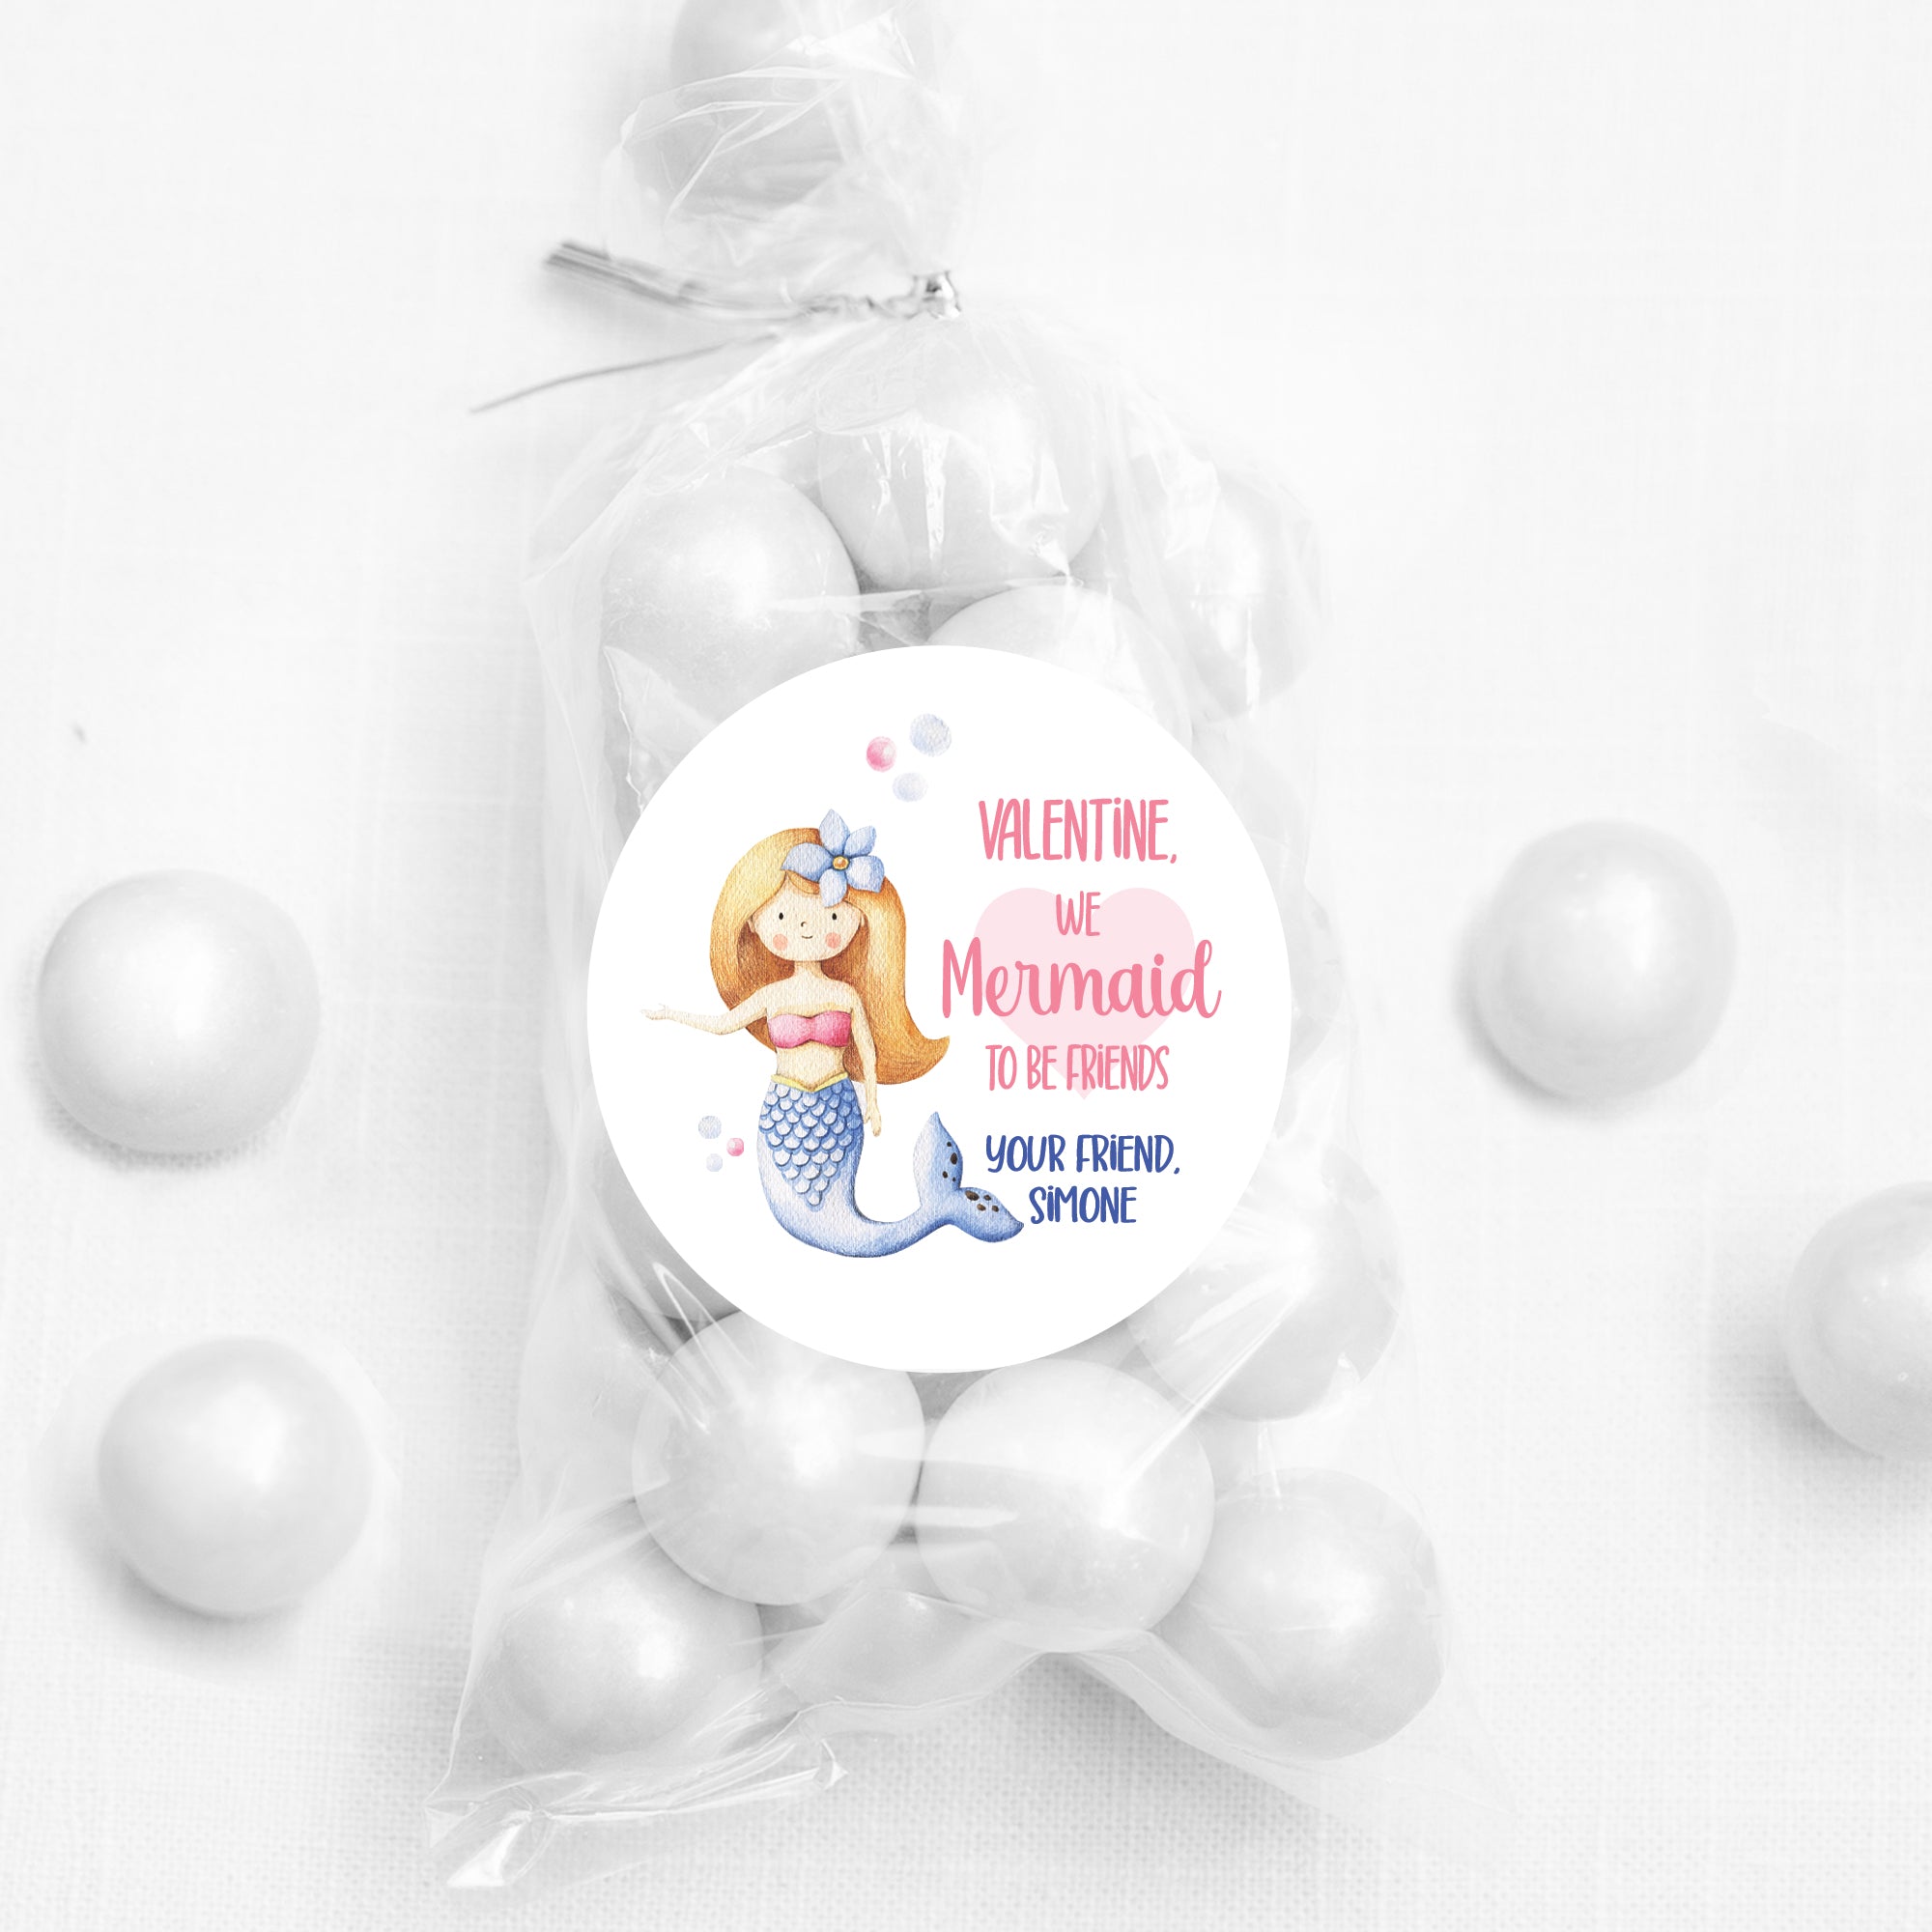 Personalized Valentine's Day stickers - We were mermaid to be friends - round 2.5" stickers - Matte finish